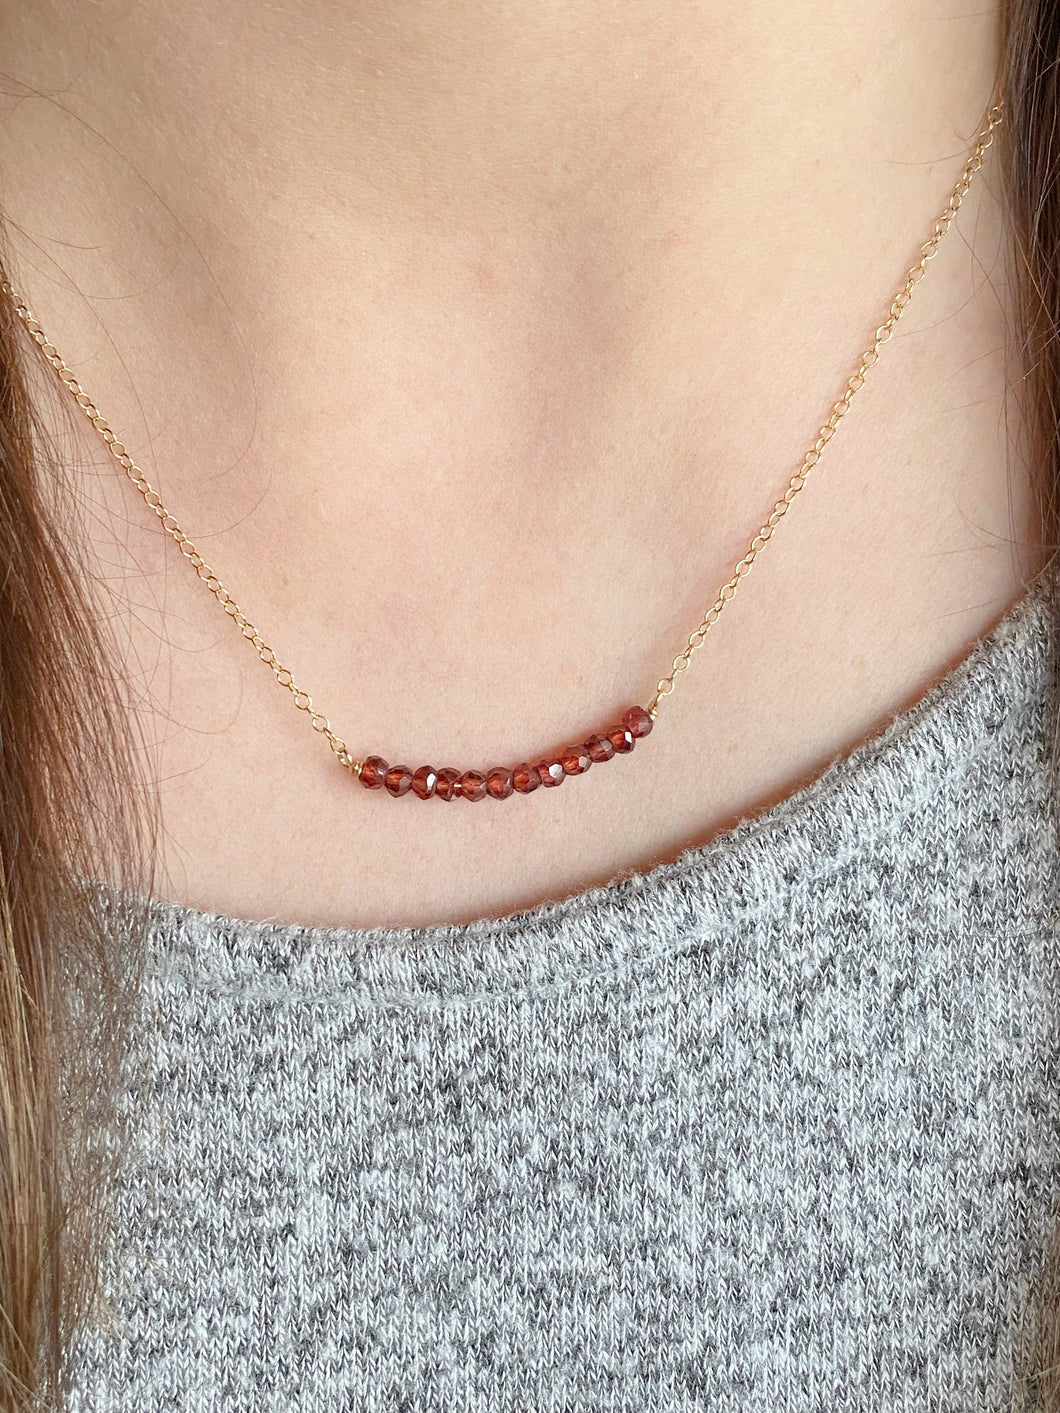 Garnet gemstone bar necklace - January Birthstone jewelry - 14k gold filled beaded bar necklace - Gift for her - Birthday gift for friend